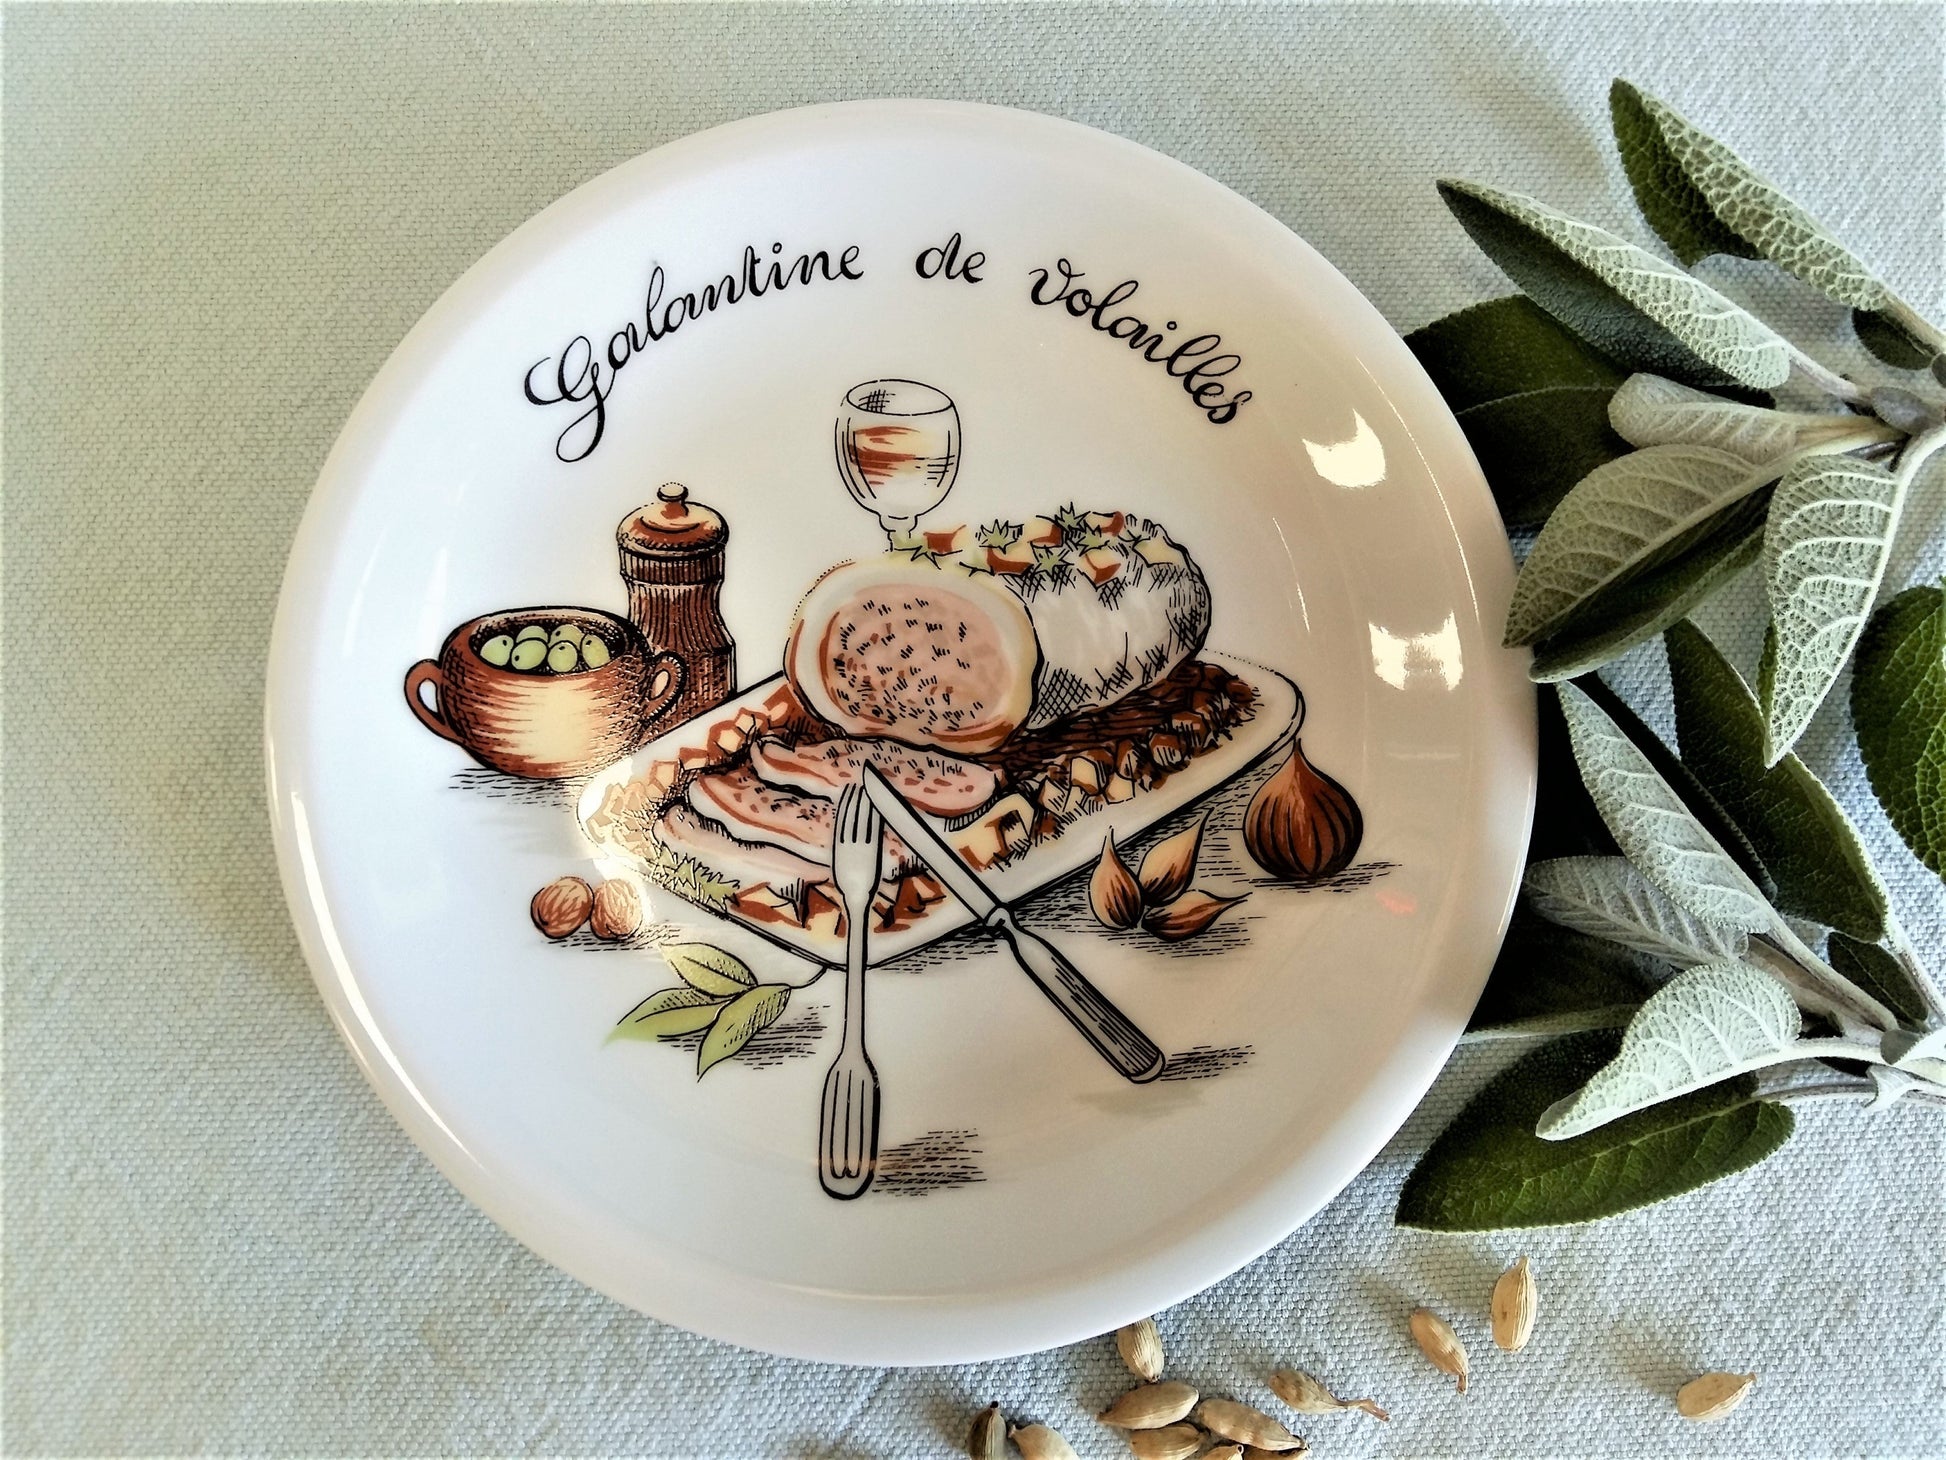 Six French Pâté Plates. Foie Gras Plates. French Entrée Plates. Terrine Plates. from Tiggy & Pip - €120.00! Shop now at Tiggy and Pip